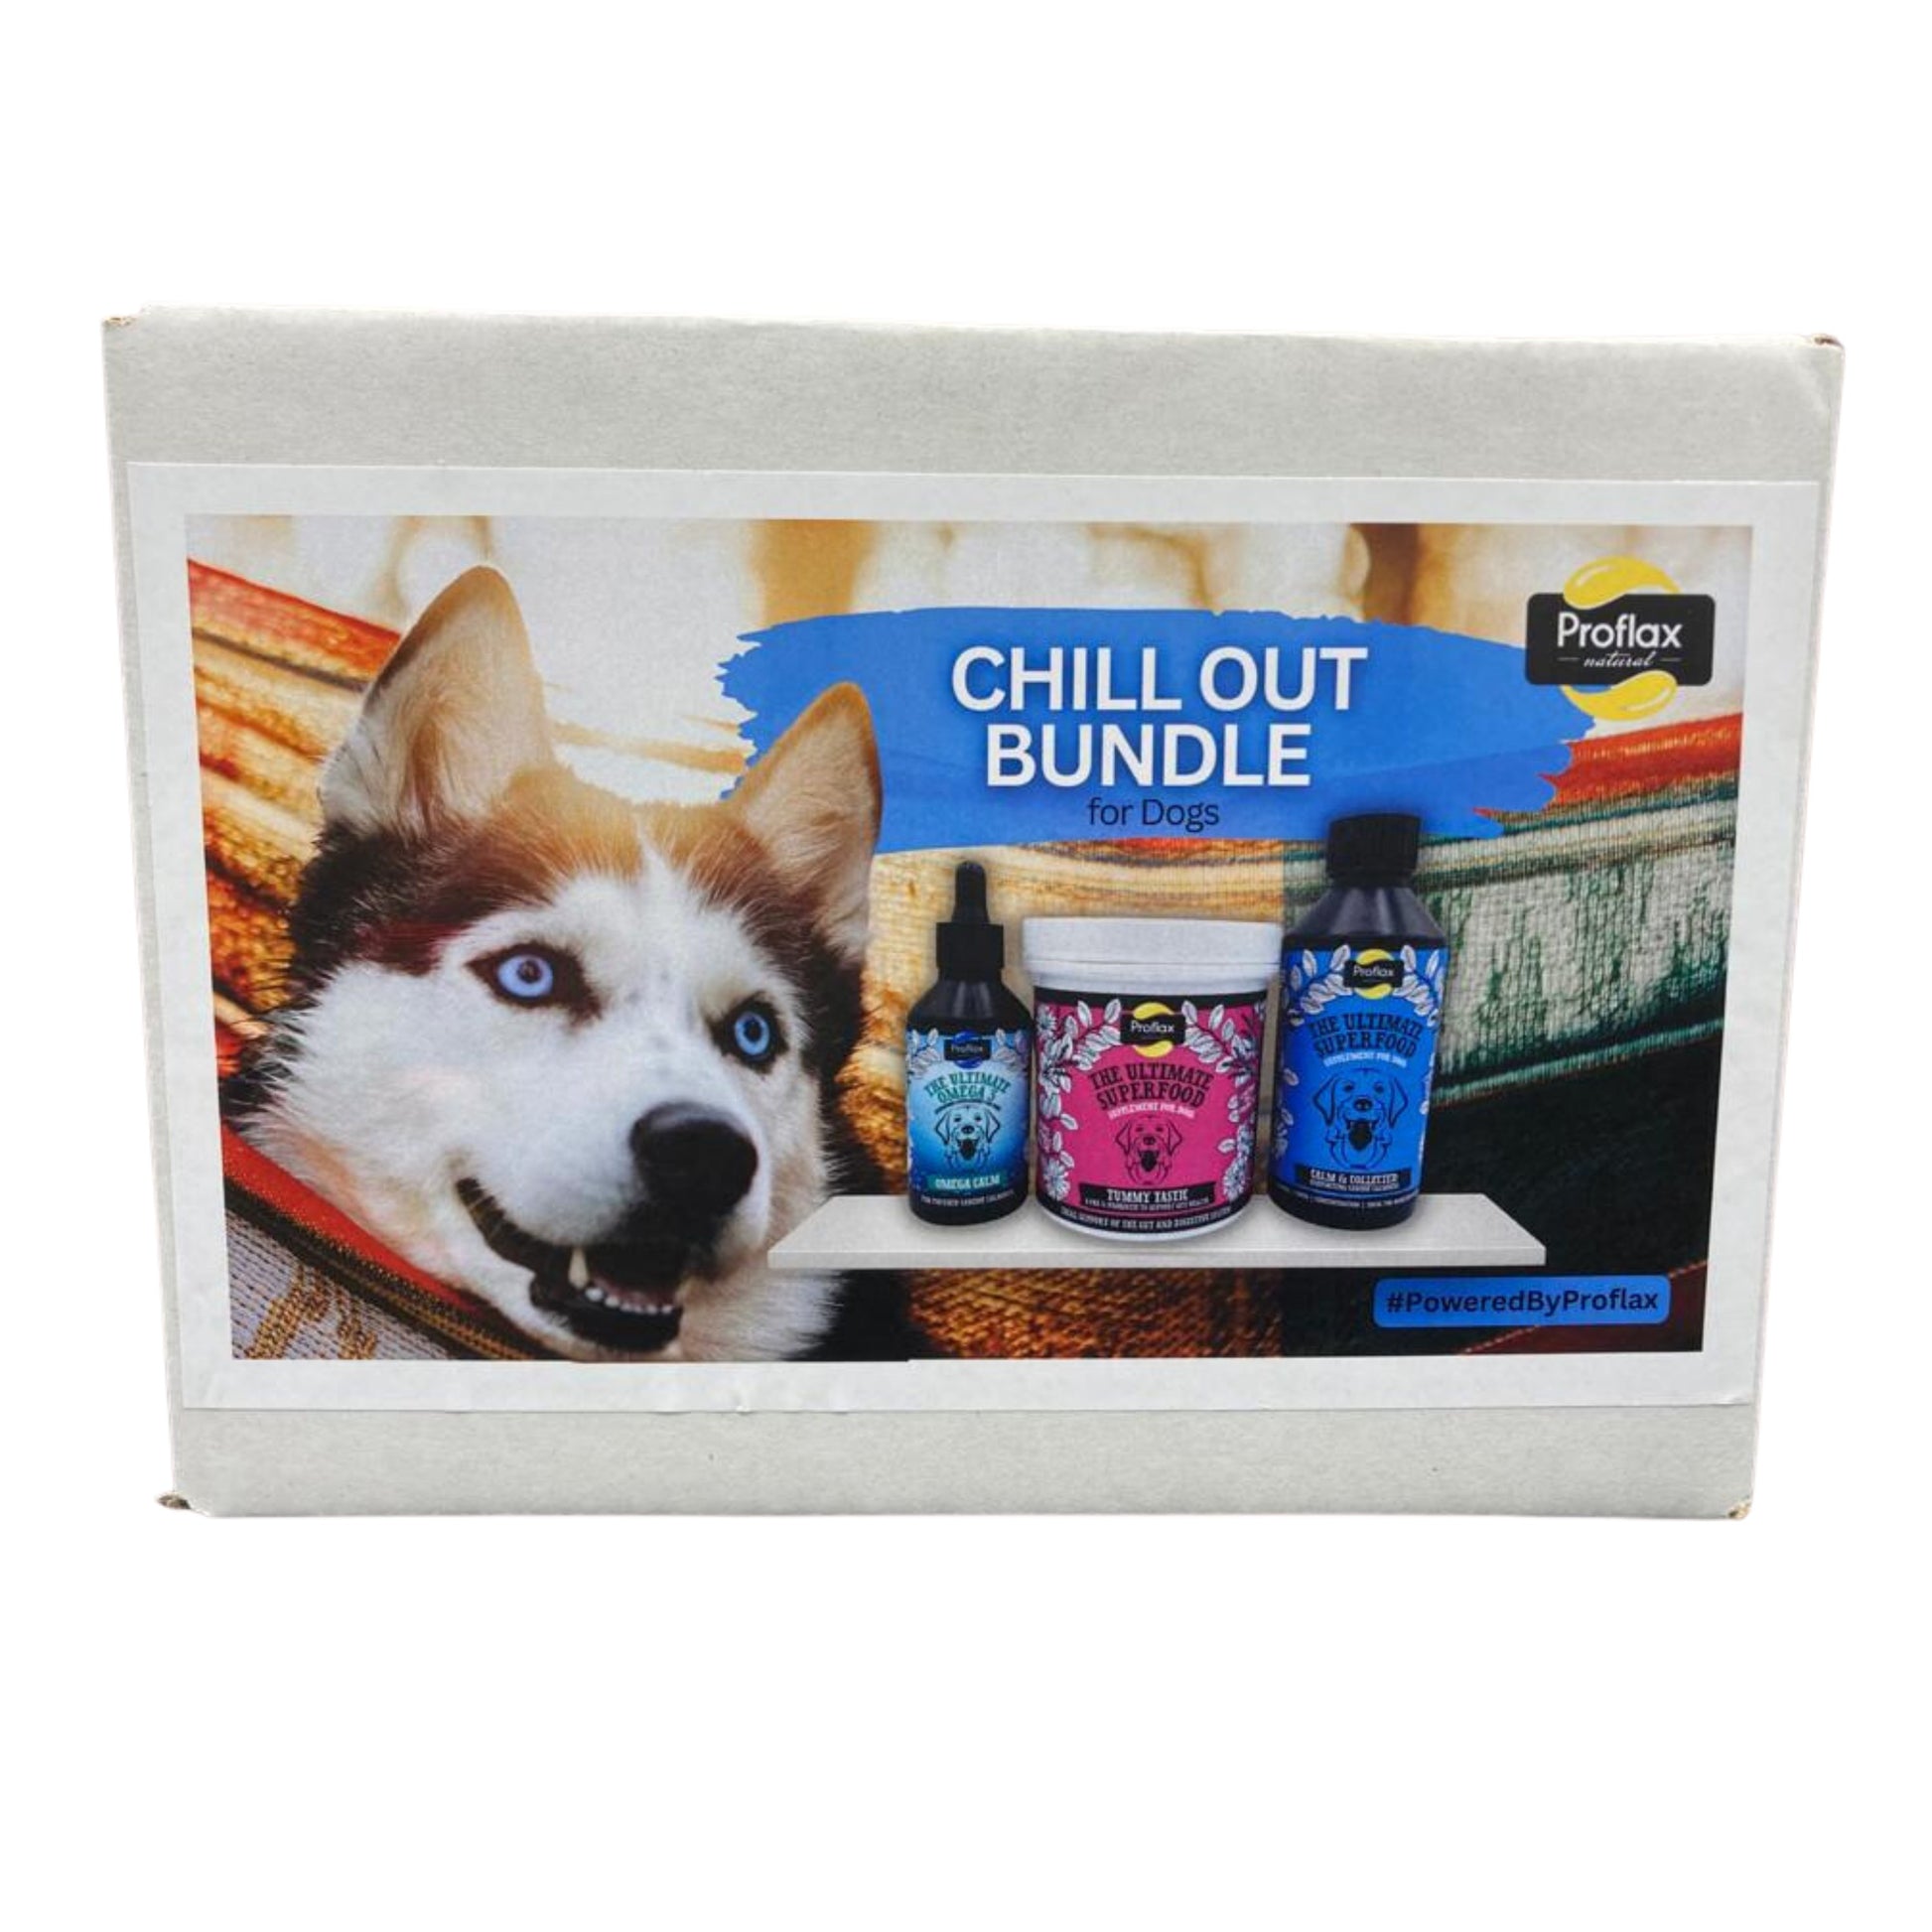 Proflax Chill Out Bundle for Dogs - Proflax